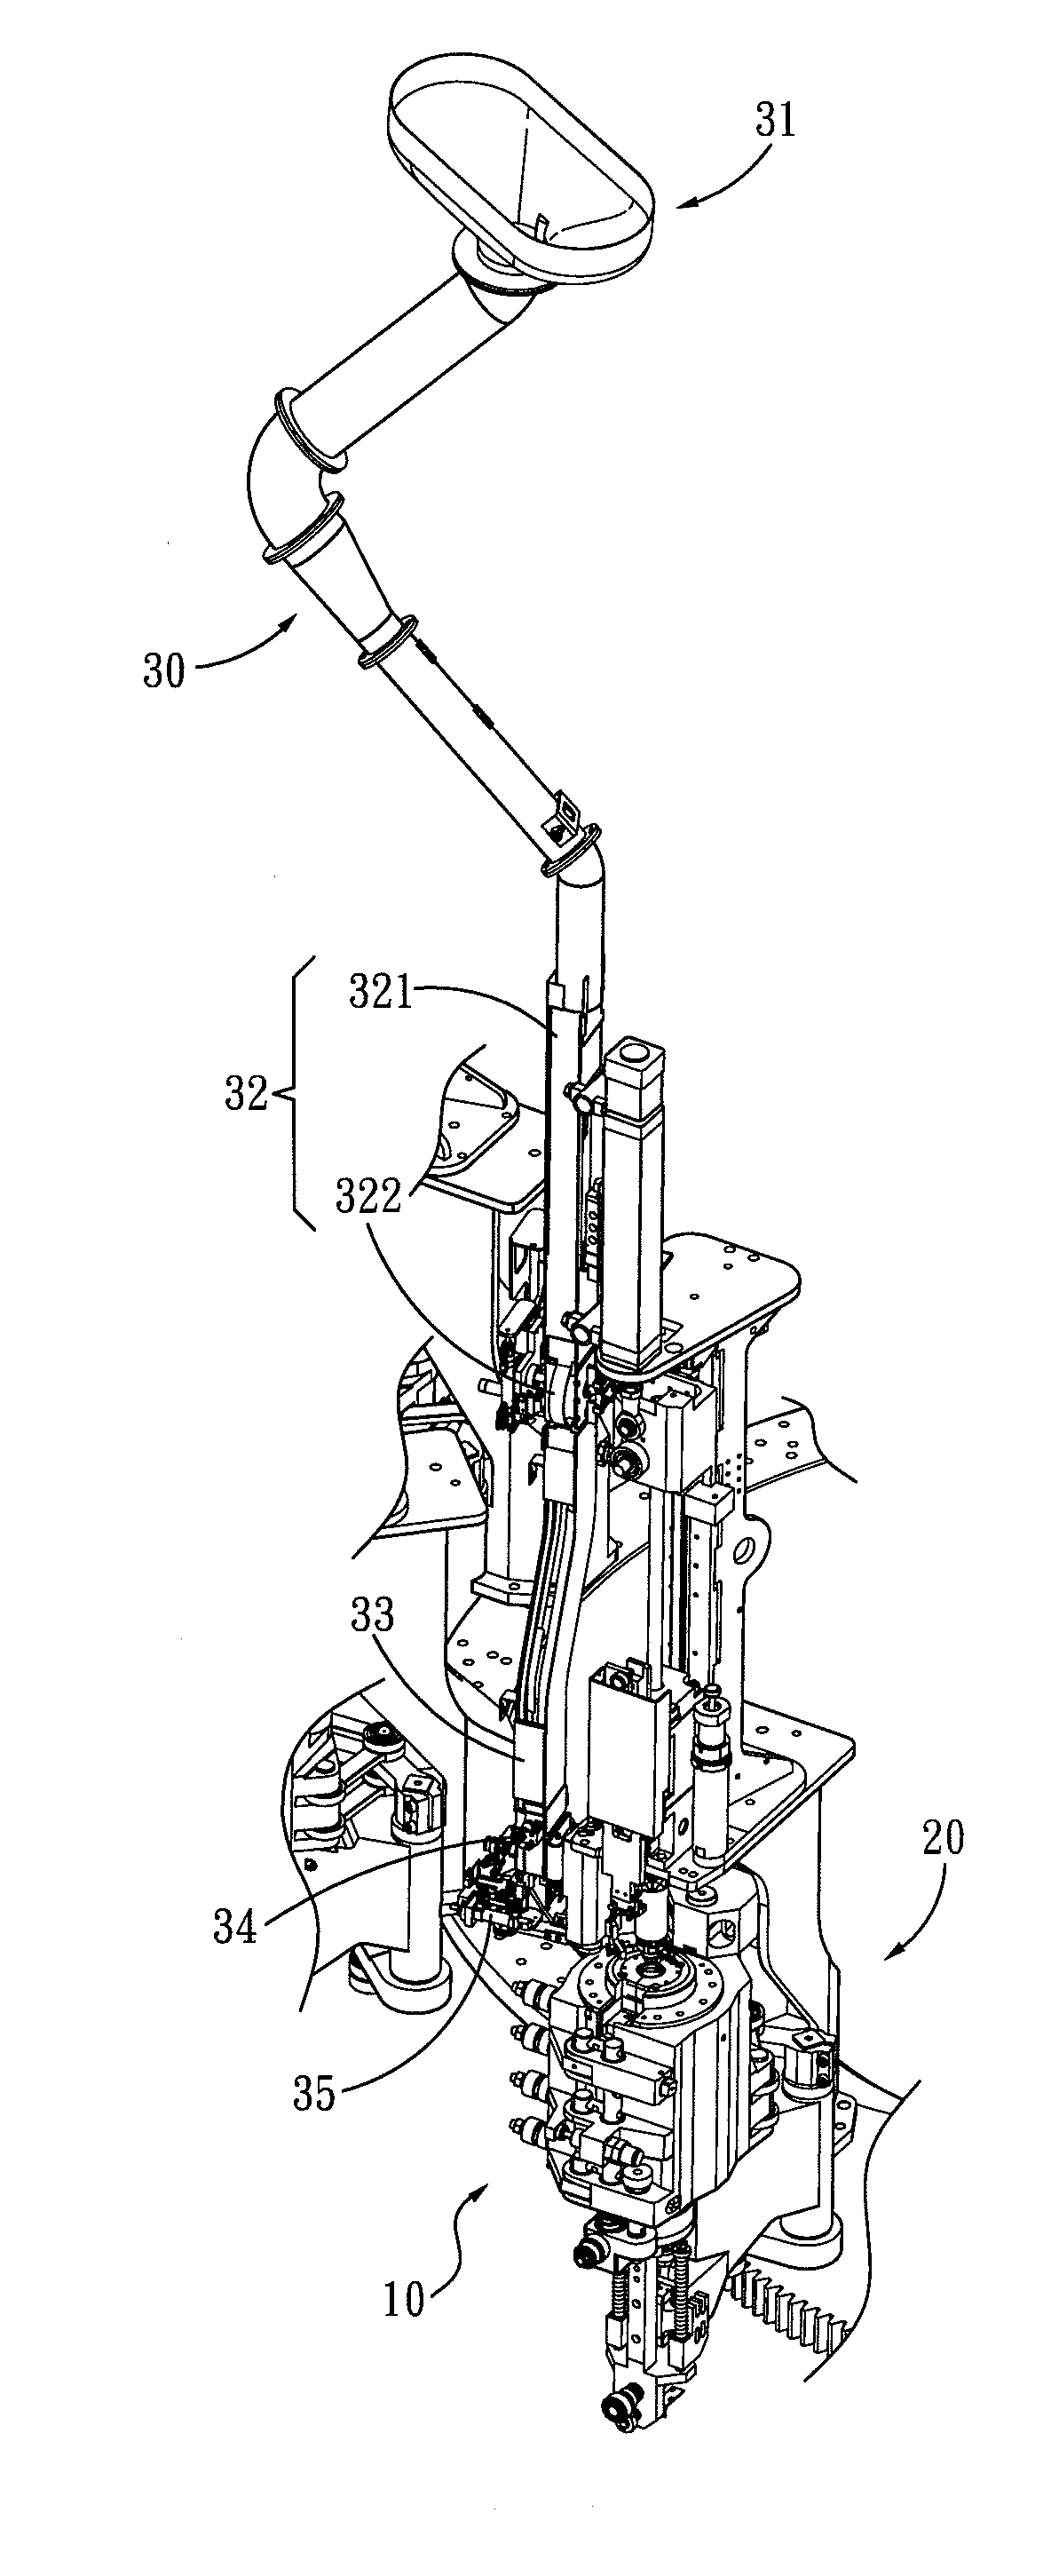 Method of aligning handles in rows for a rotating blow-molding machine for handled-bottles